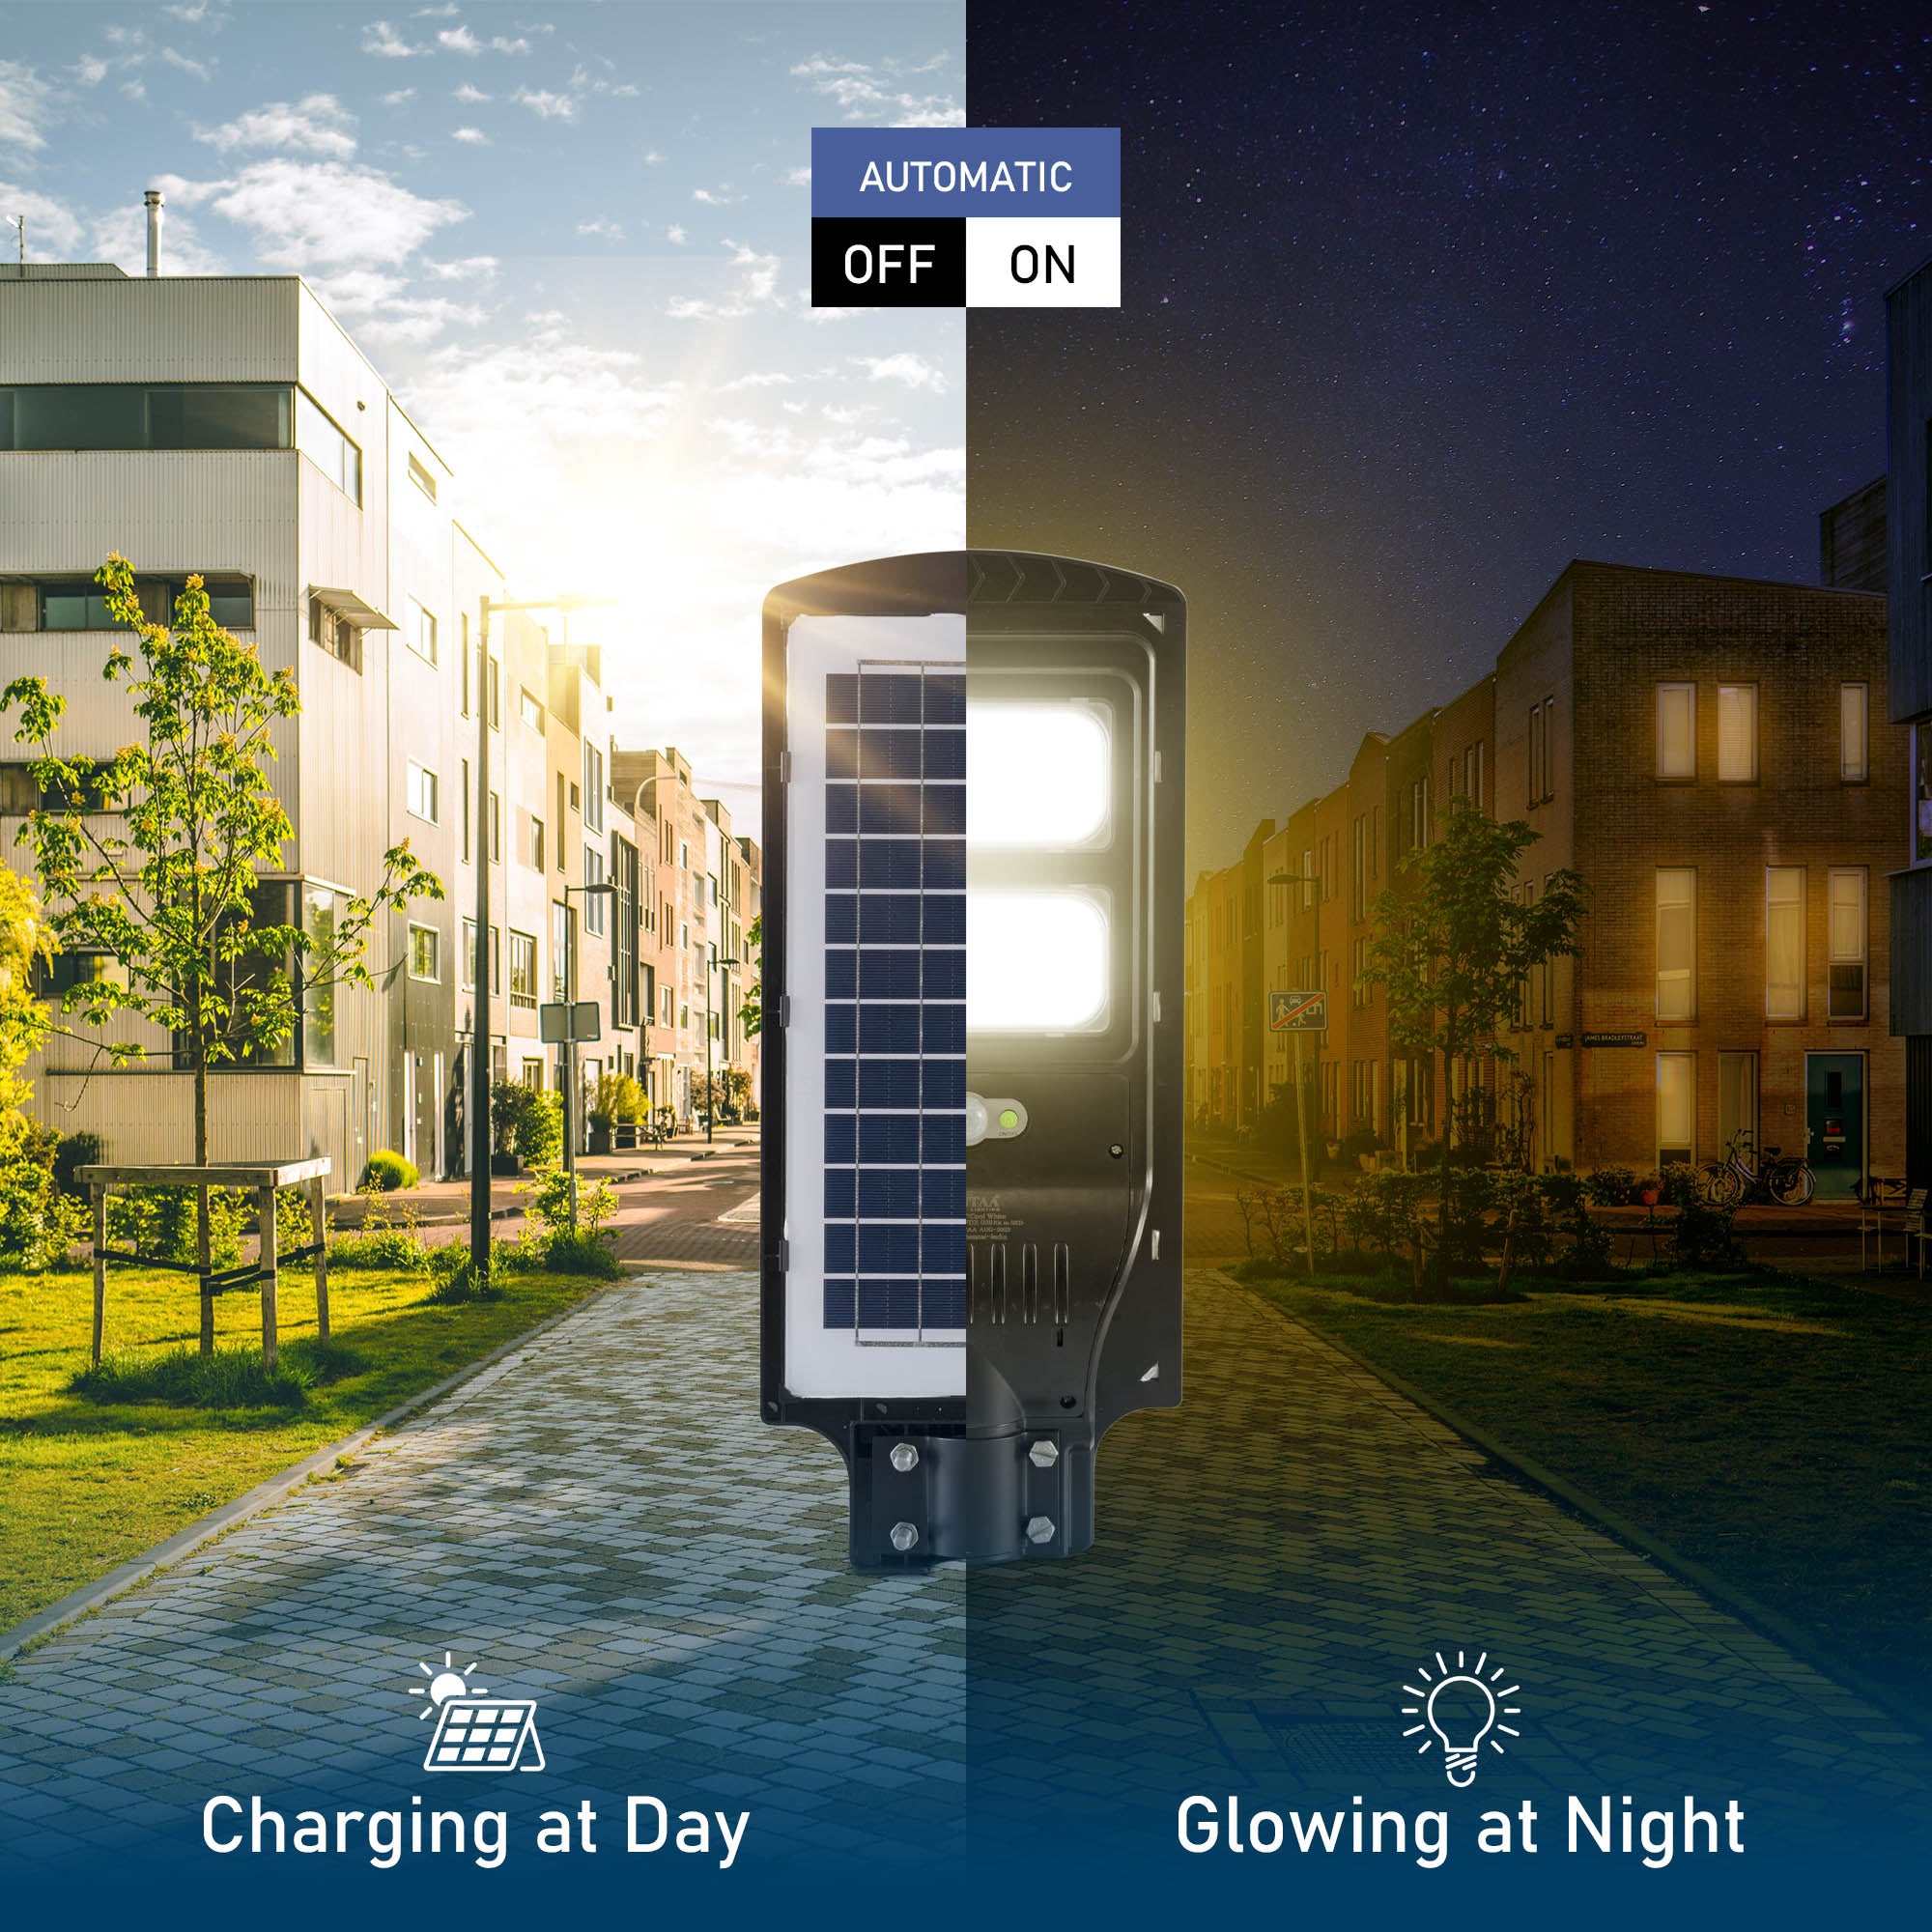 Automatic on and off Erato 40W solar street light #power_40w